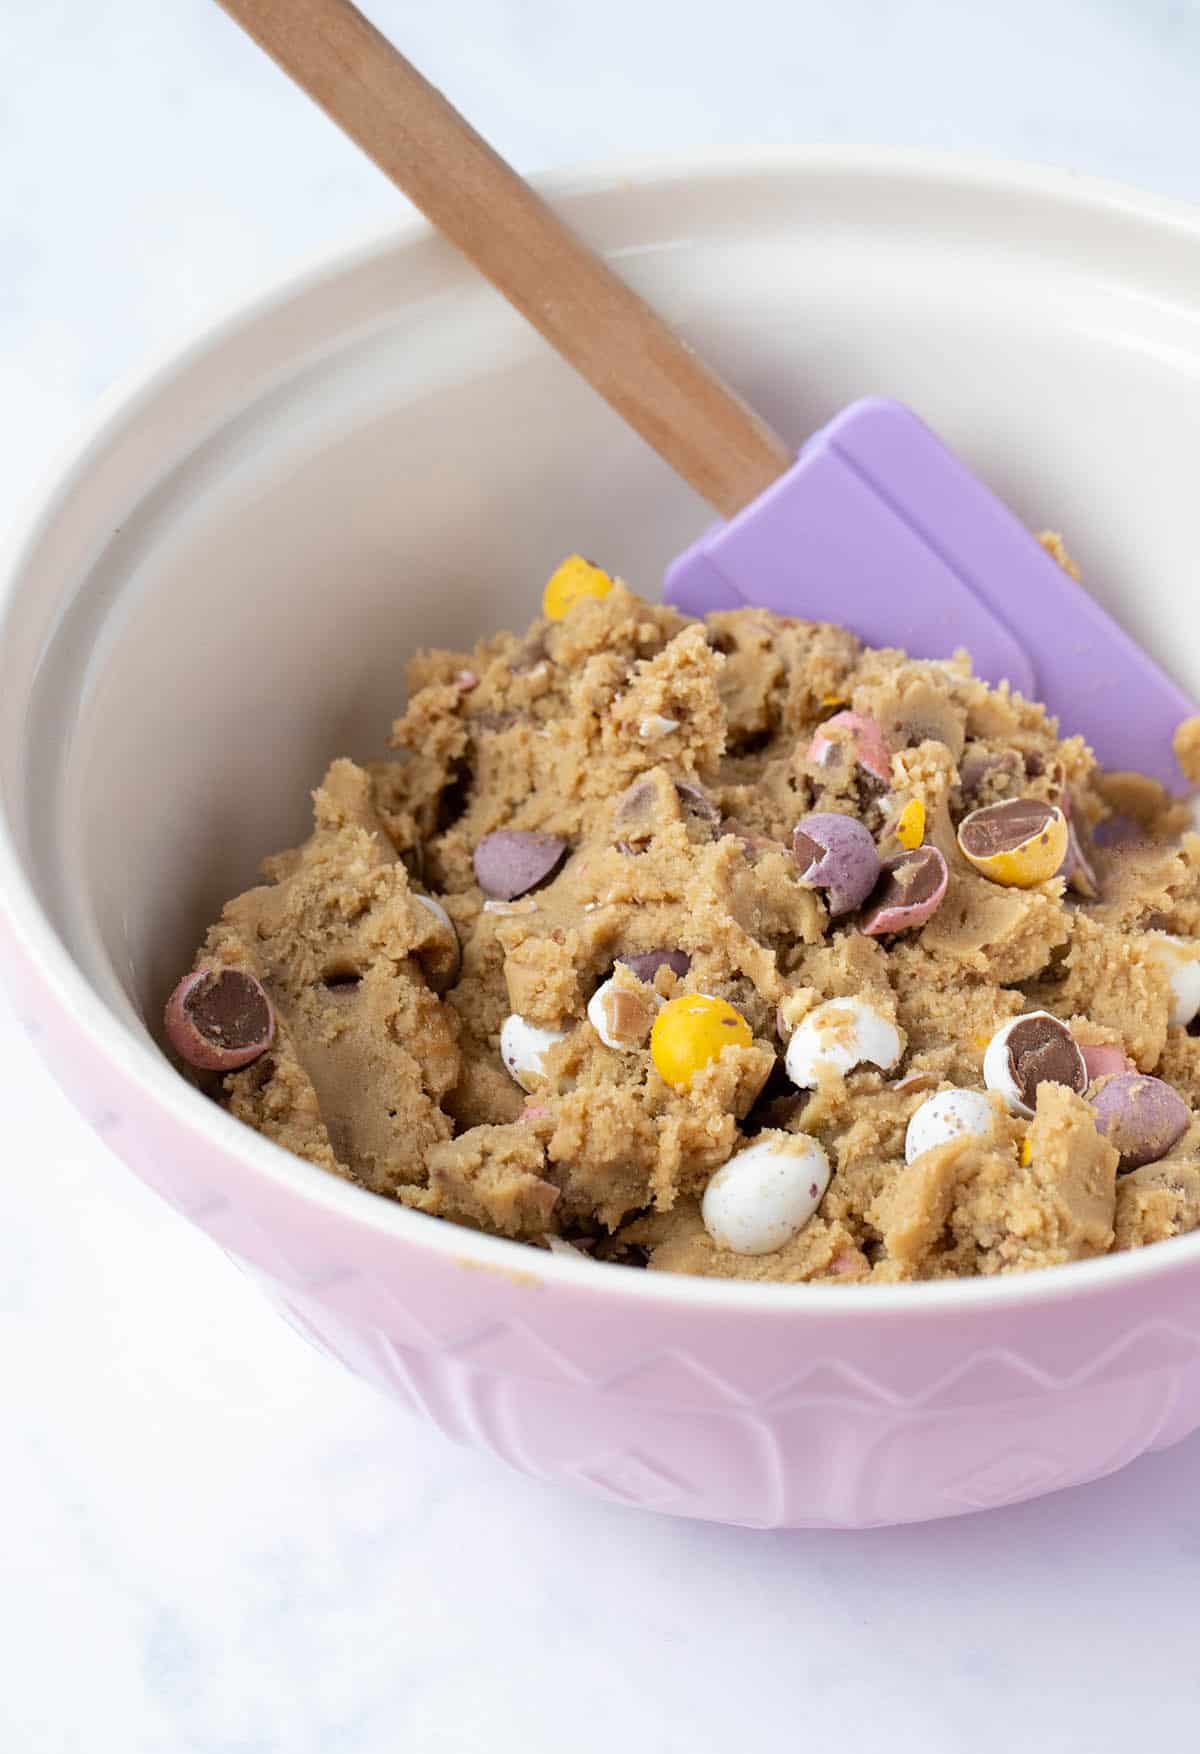 A bowl of homemade Mini Egg Cookie Dough ready to be rolled and baked.